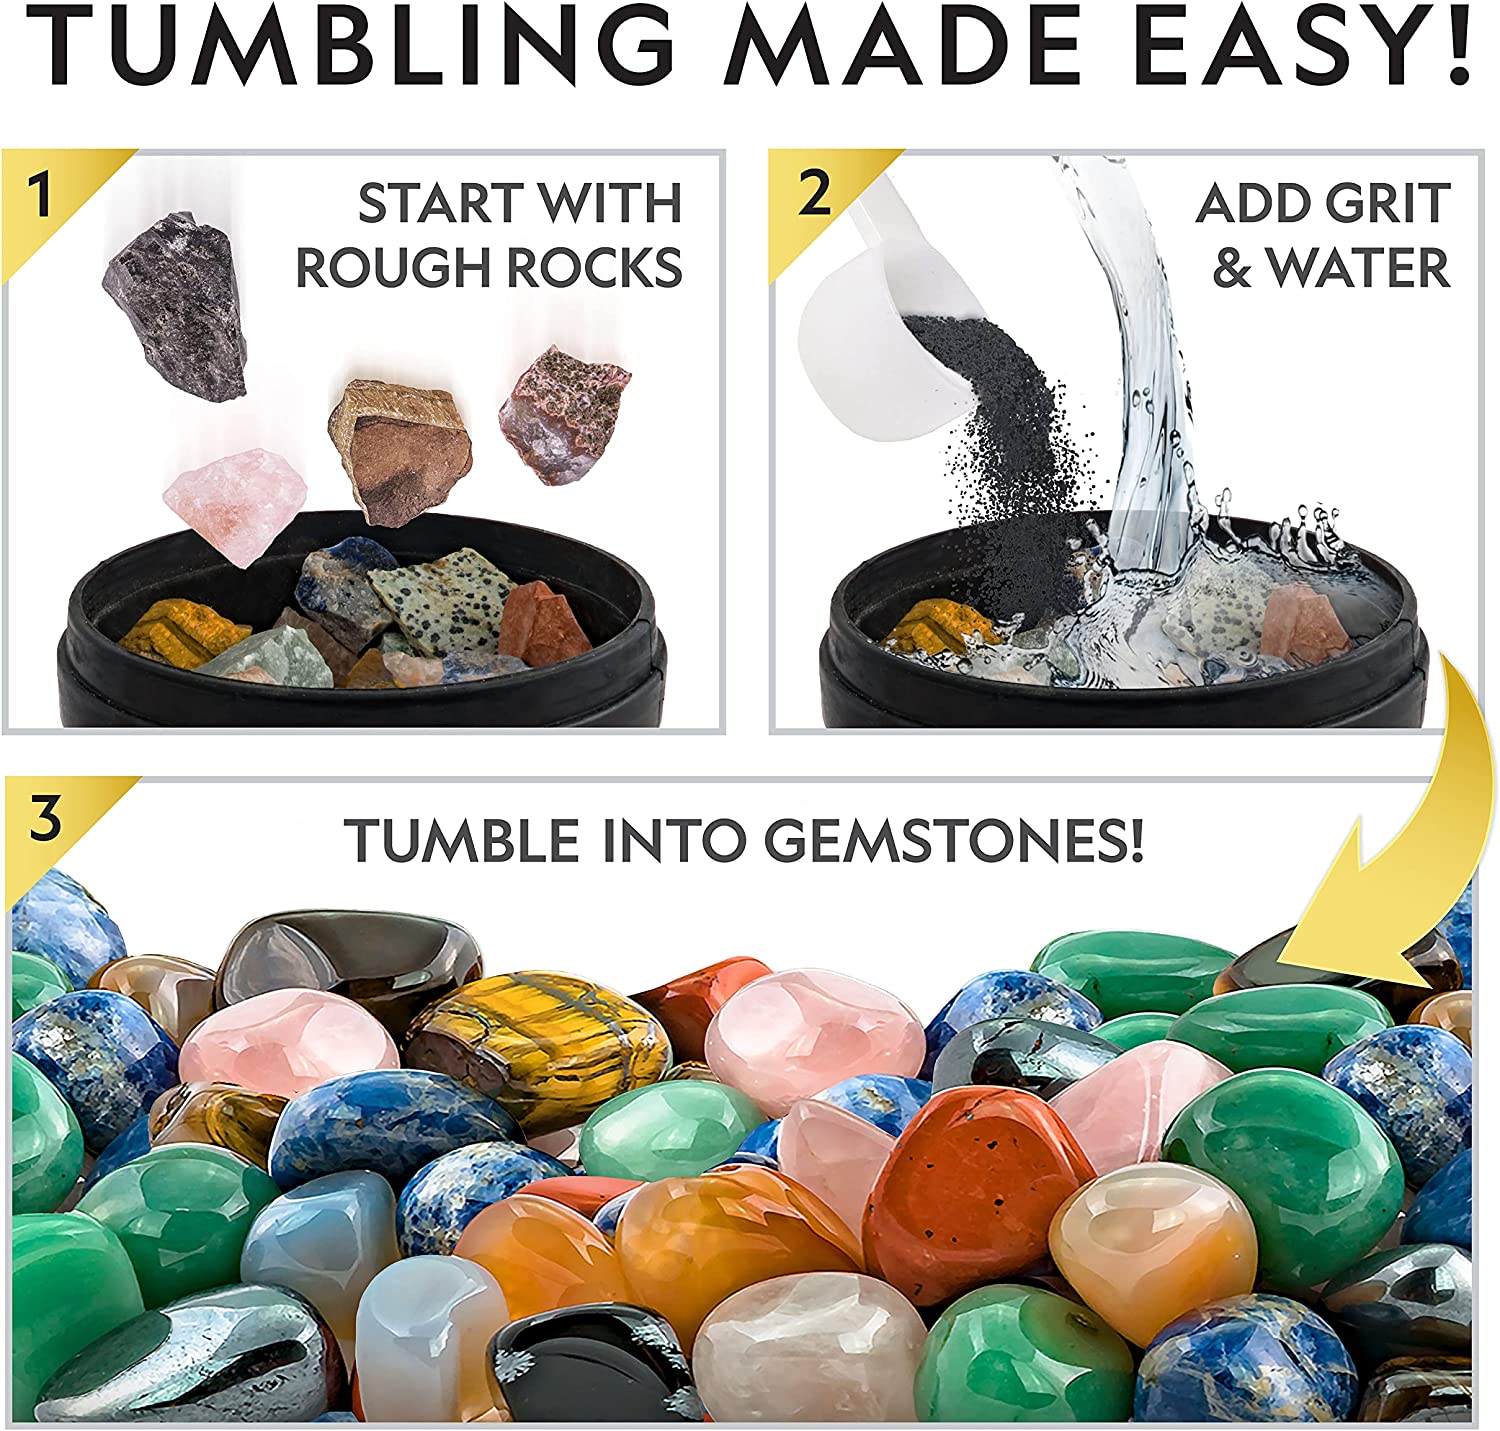  NATIONAL GEOGRAPHIC Professional Rock Tumbler Kit - Complete Rock  Tumbler for Adults & Kids with Durable 2 Lb. Barrel, Rocks, Grit, and  Patented GemFoam Finishing Foam Polish, Rock Polisher : Toys